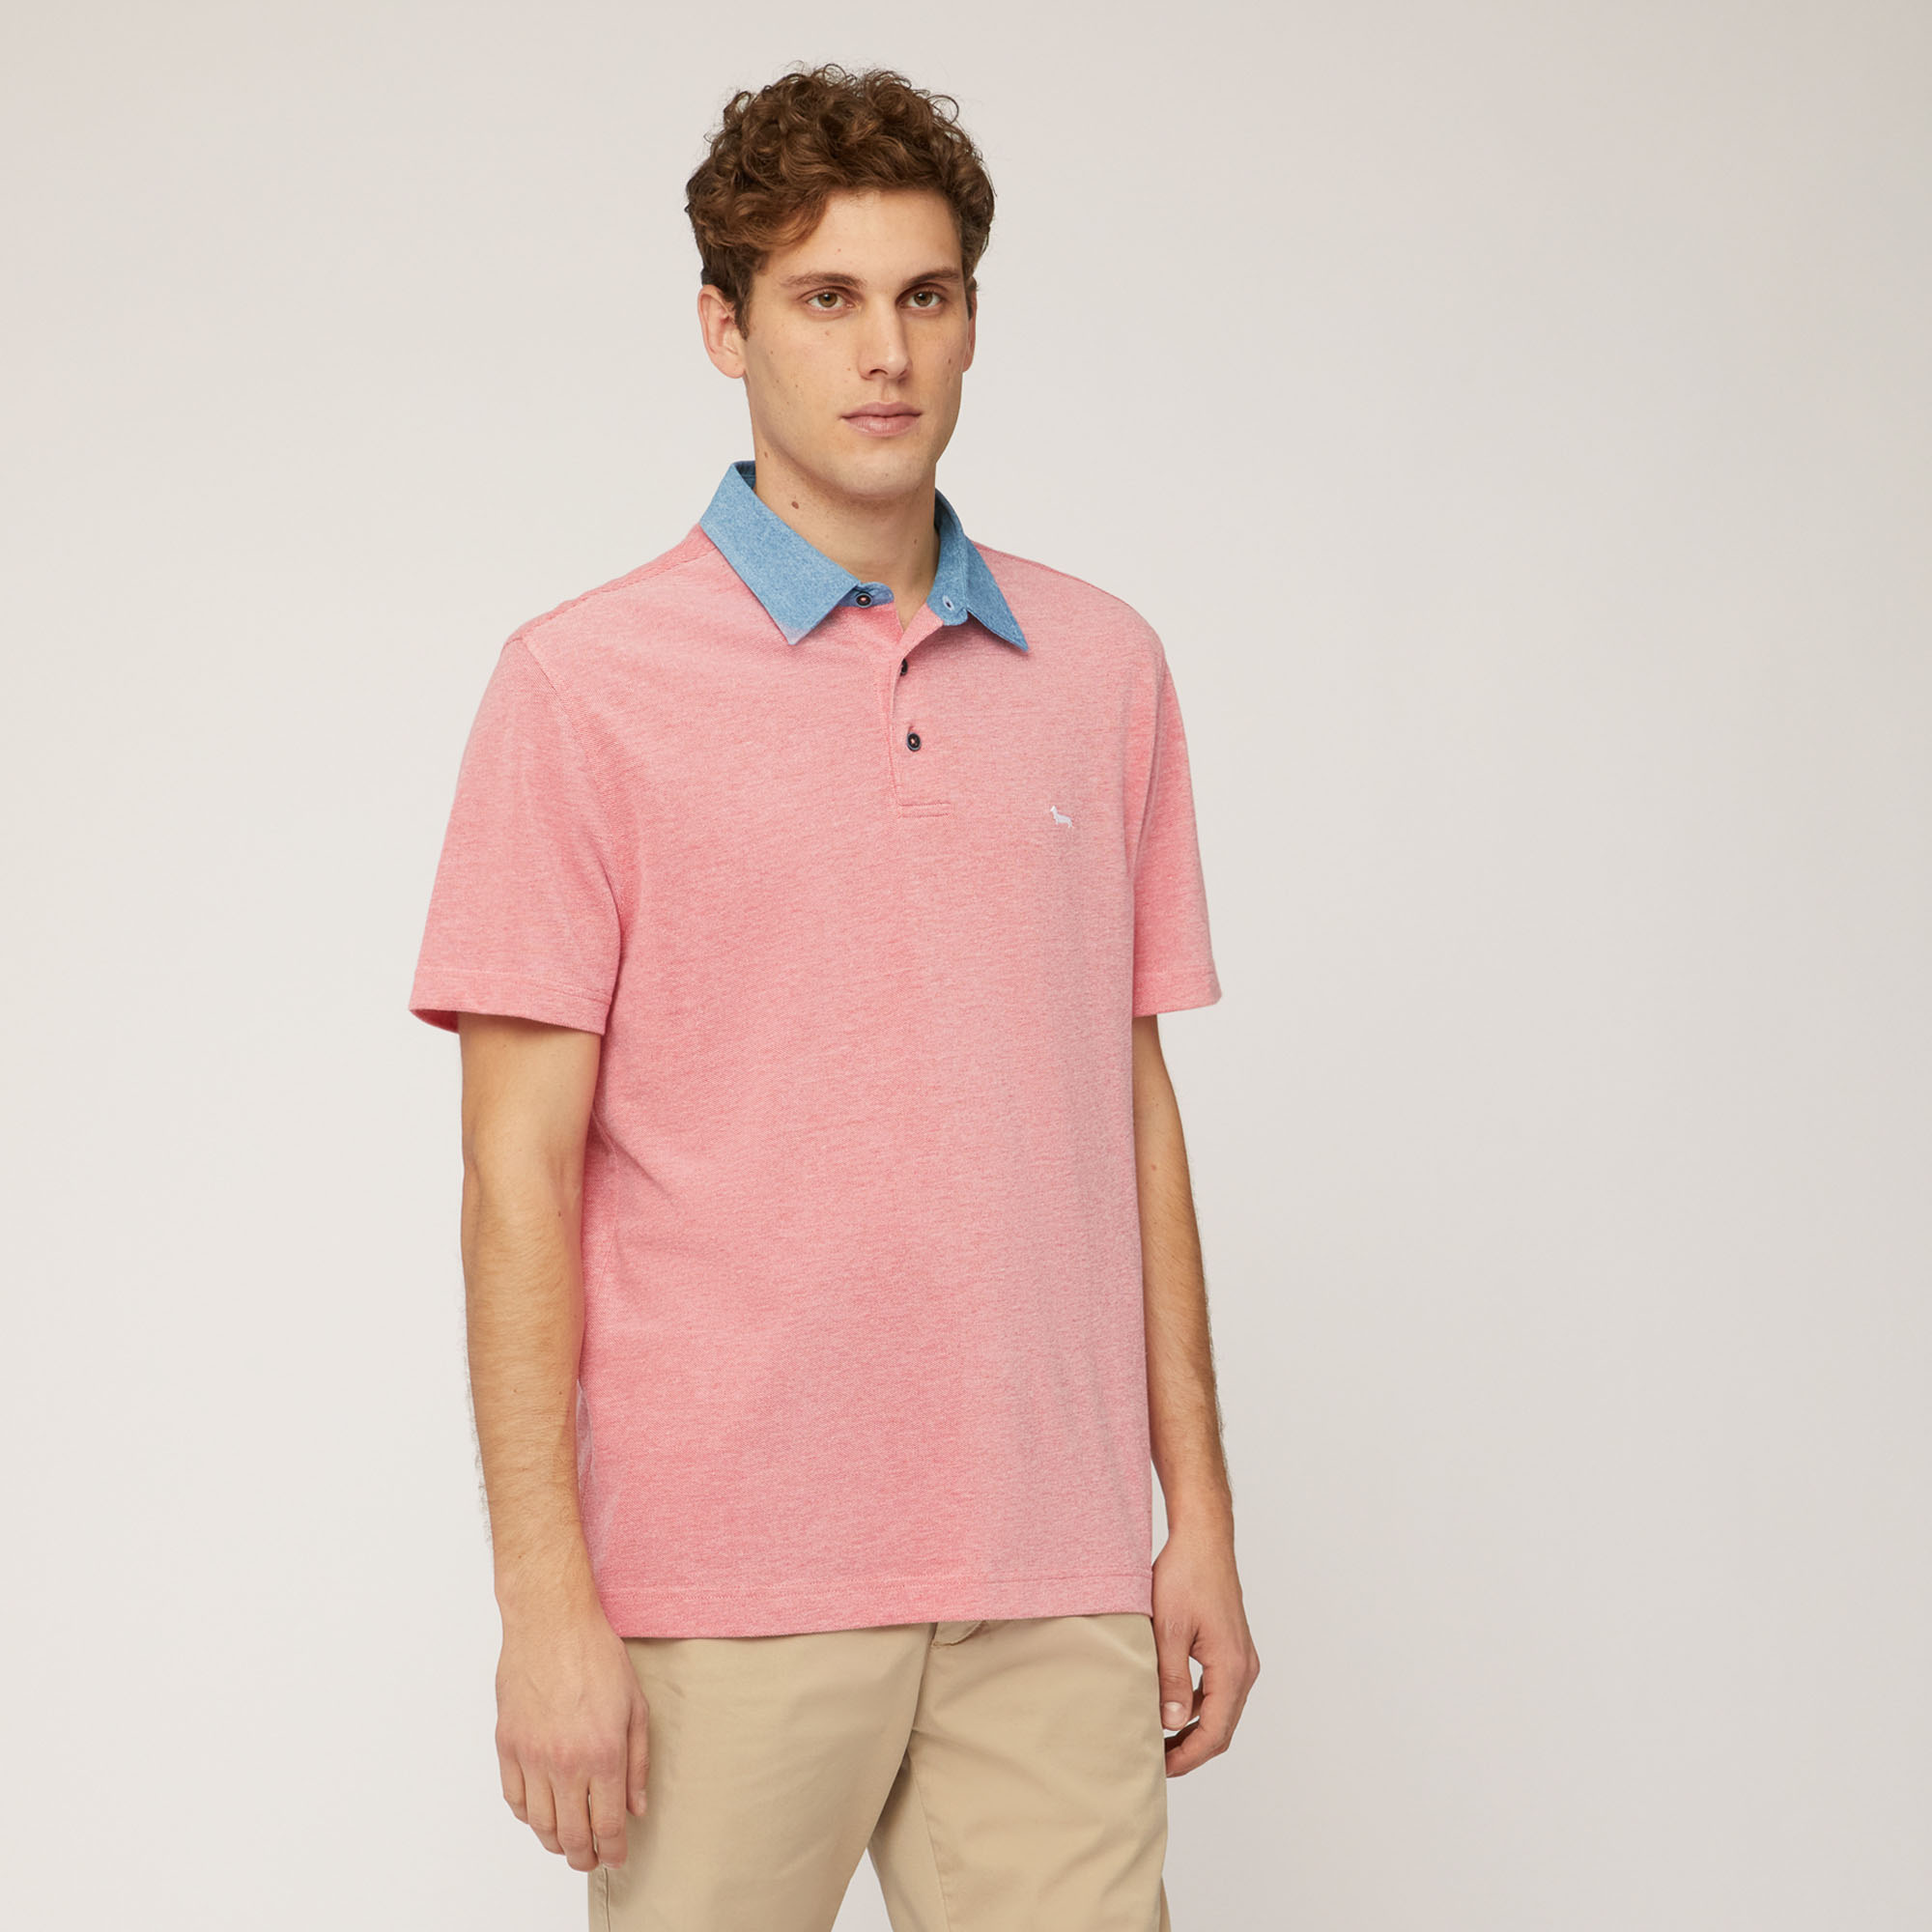 Oxford Cotton Vietri Polo, Light Red, large image number 0